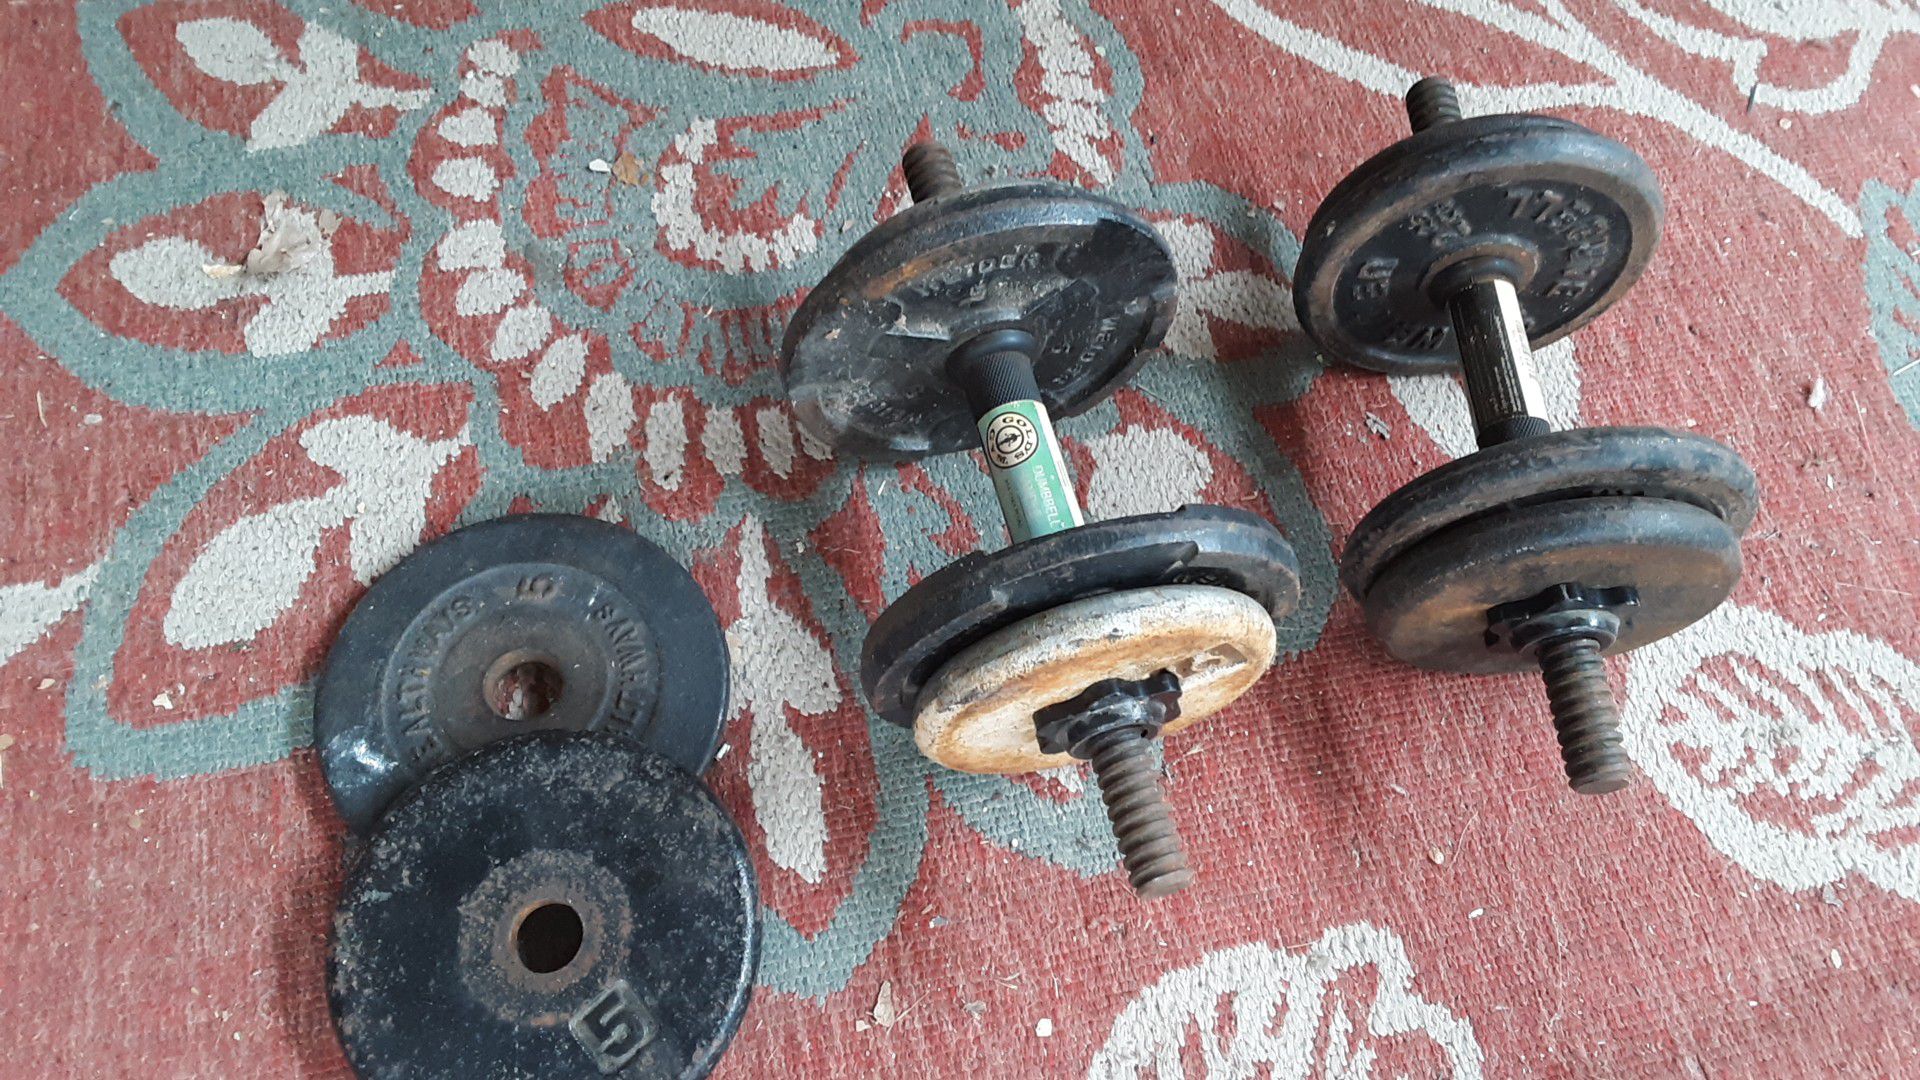 Barbells/dumbbells 50 lbs in weights and hand bars included